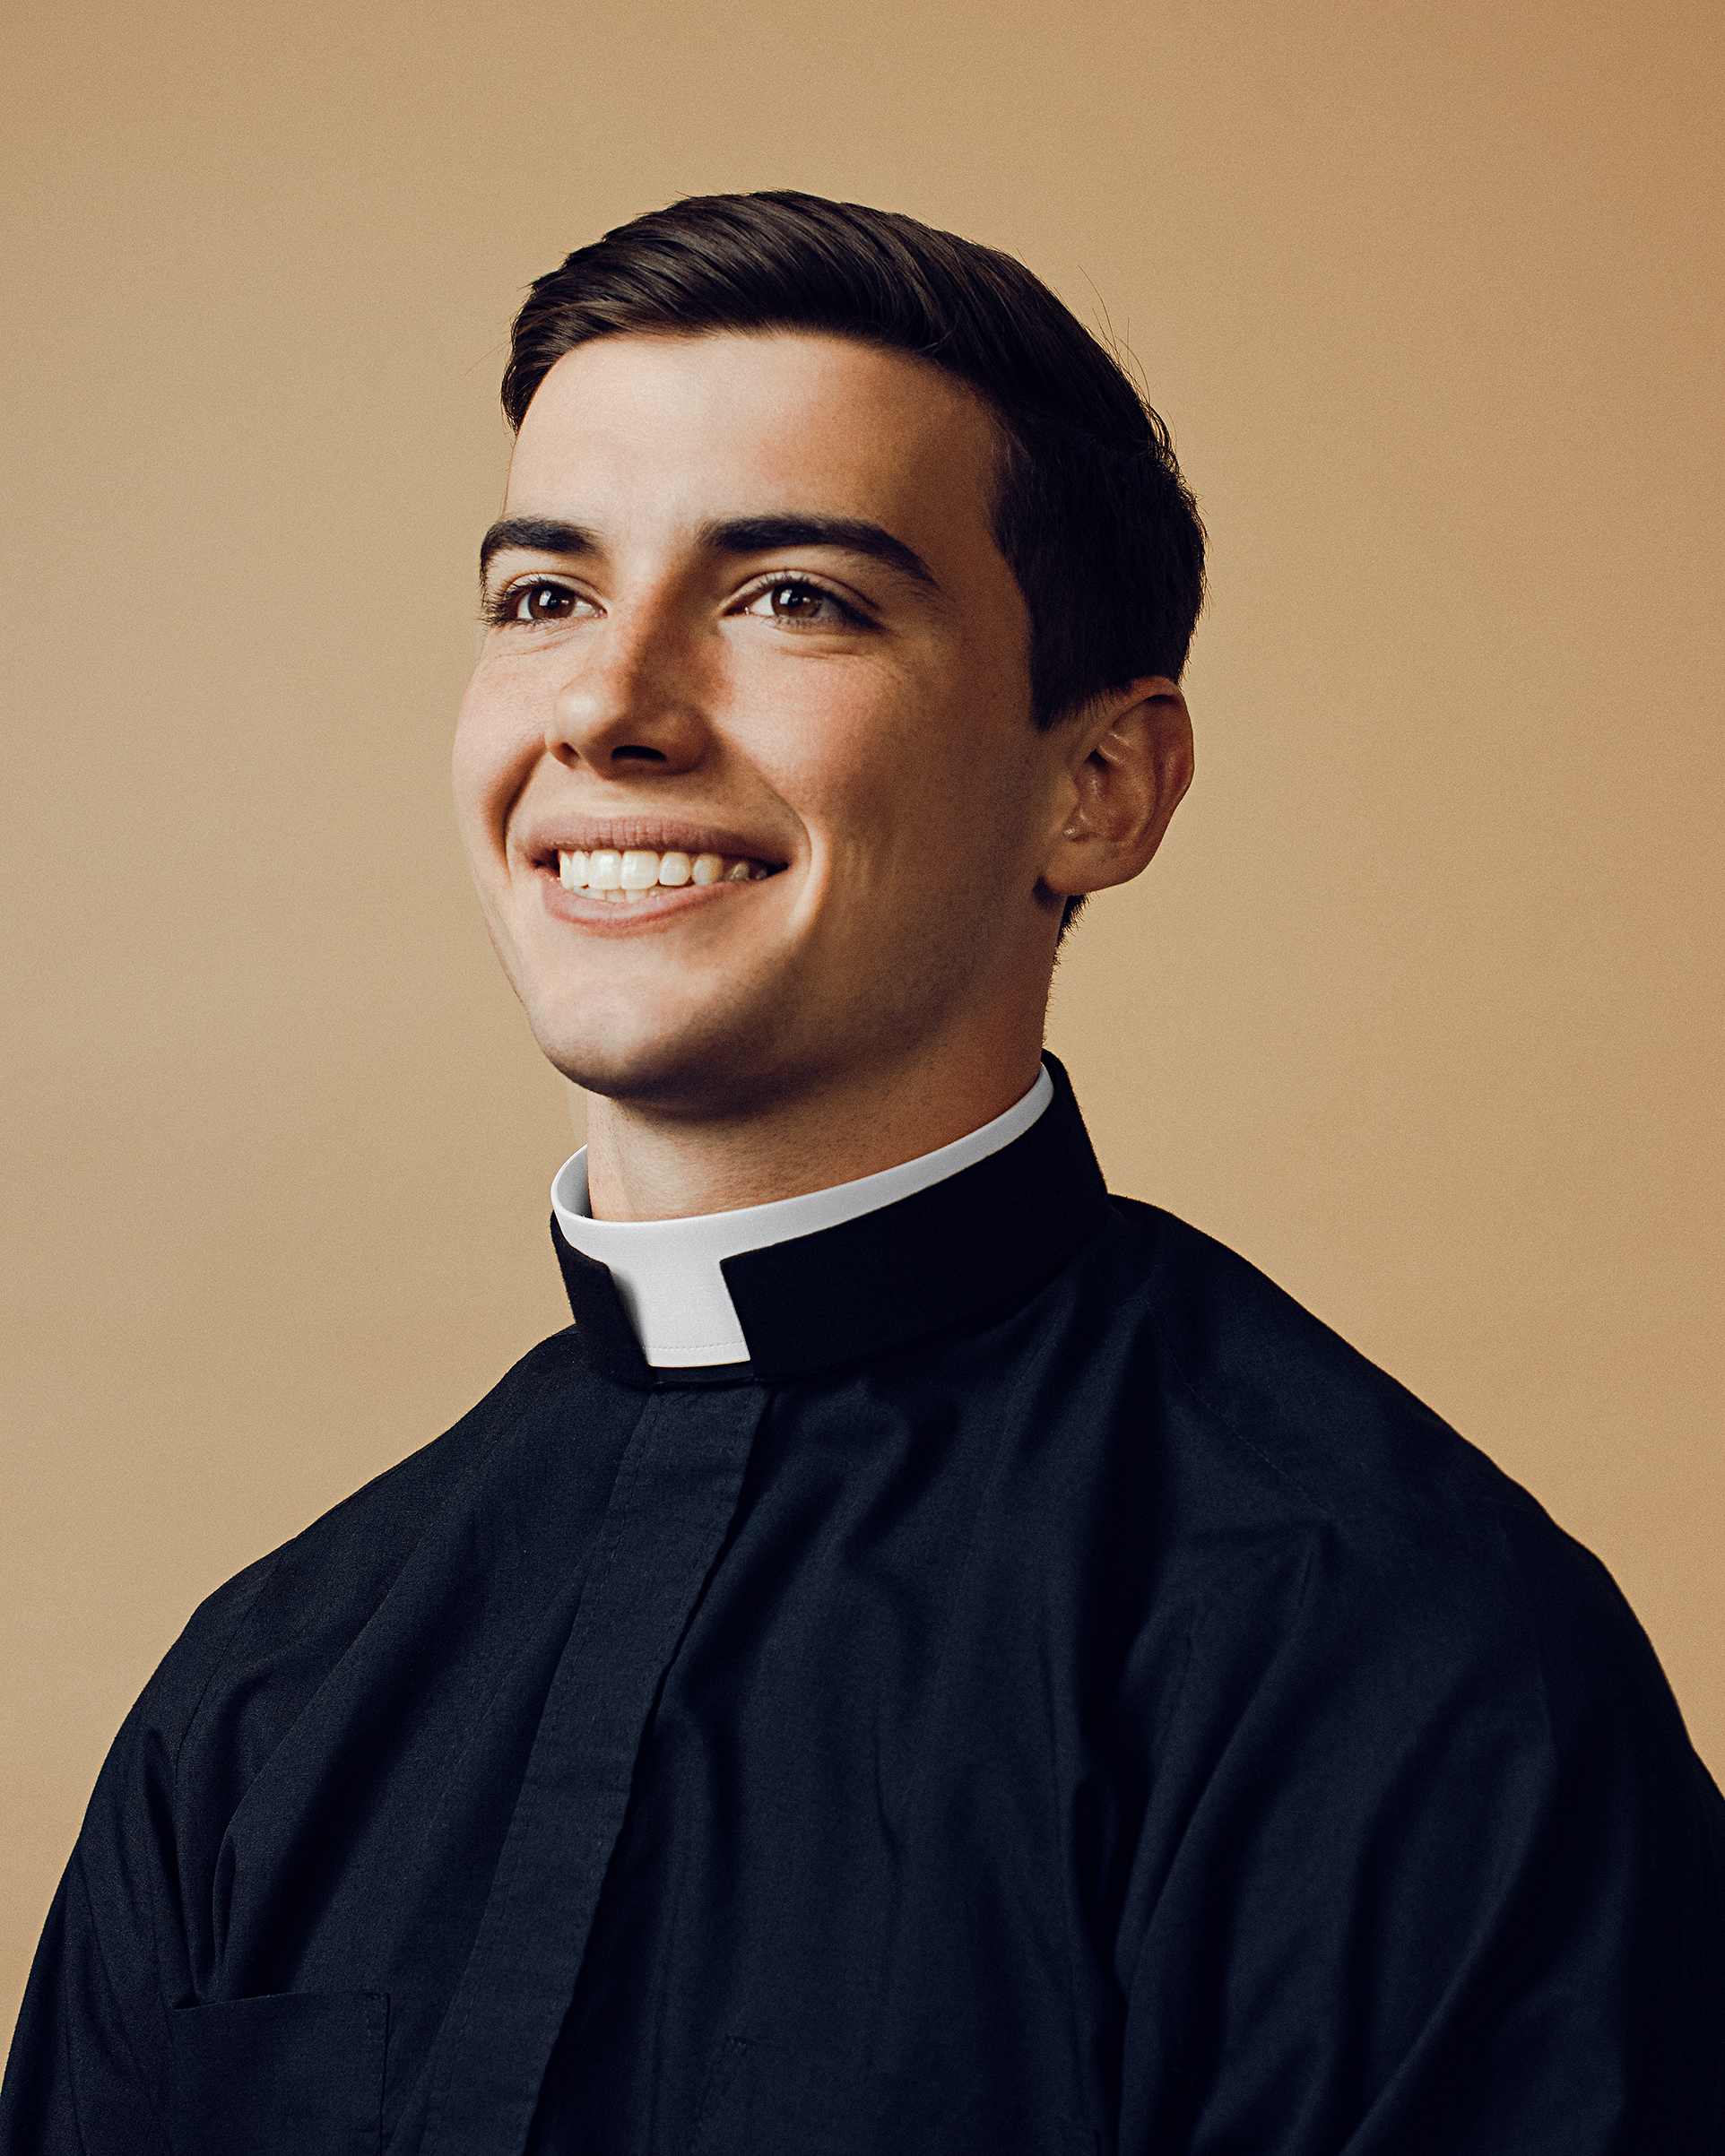 Nicholas Morrison, 22, graduated in May with a philosophy degree from Catholic University of America and will continue his seminary studies in Rome next year (Ryan Pfluger for TIME)